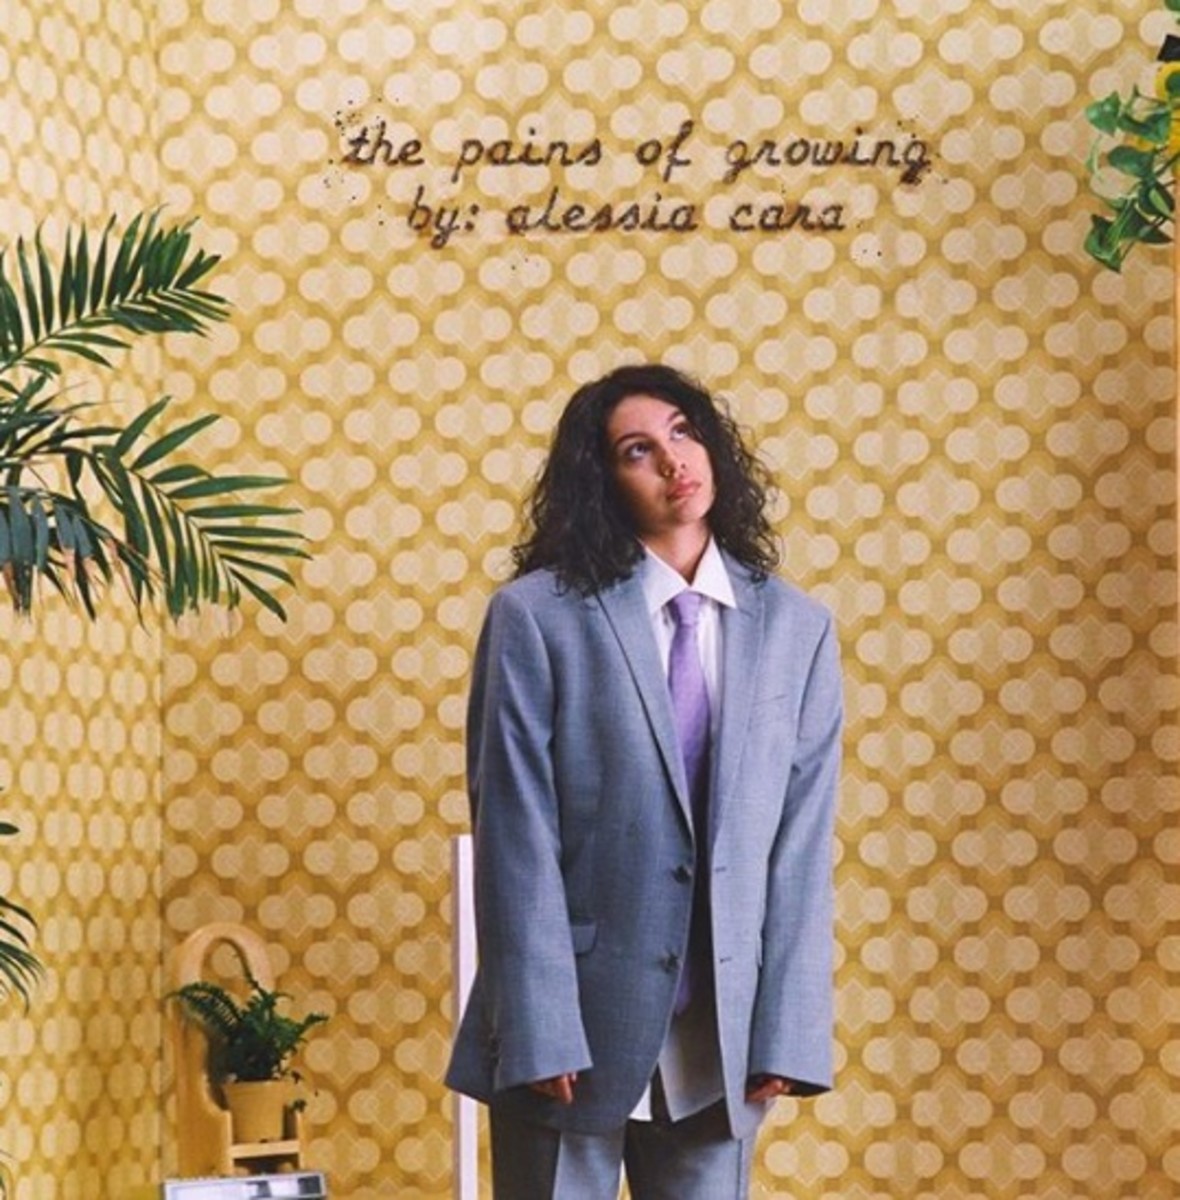 Alessia Cara - The Pains of Growing Album